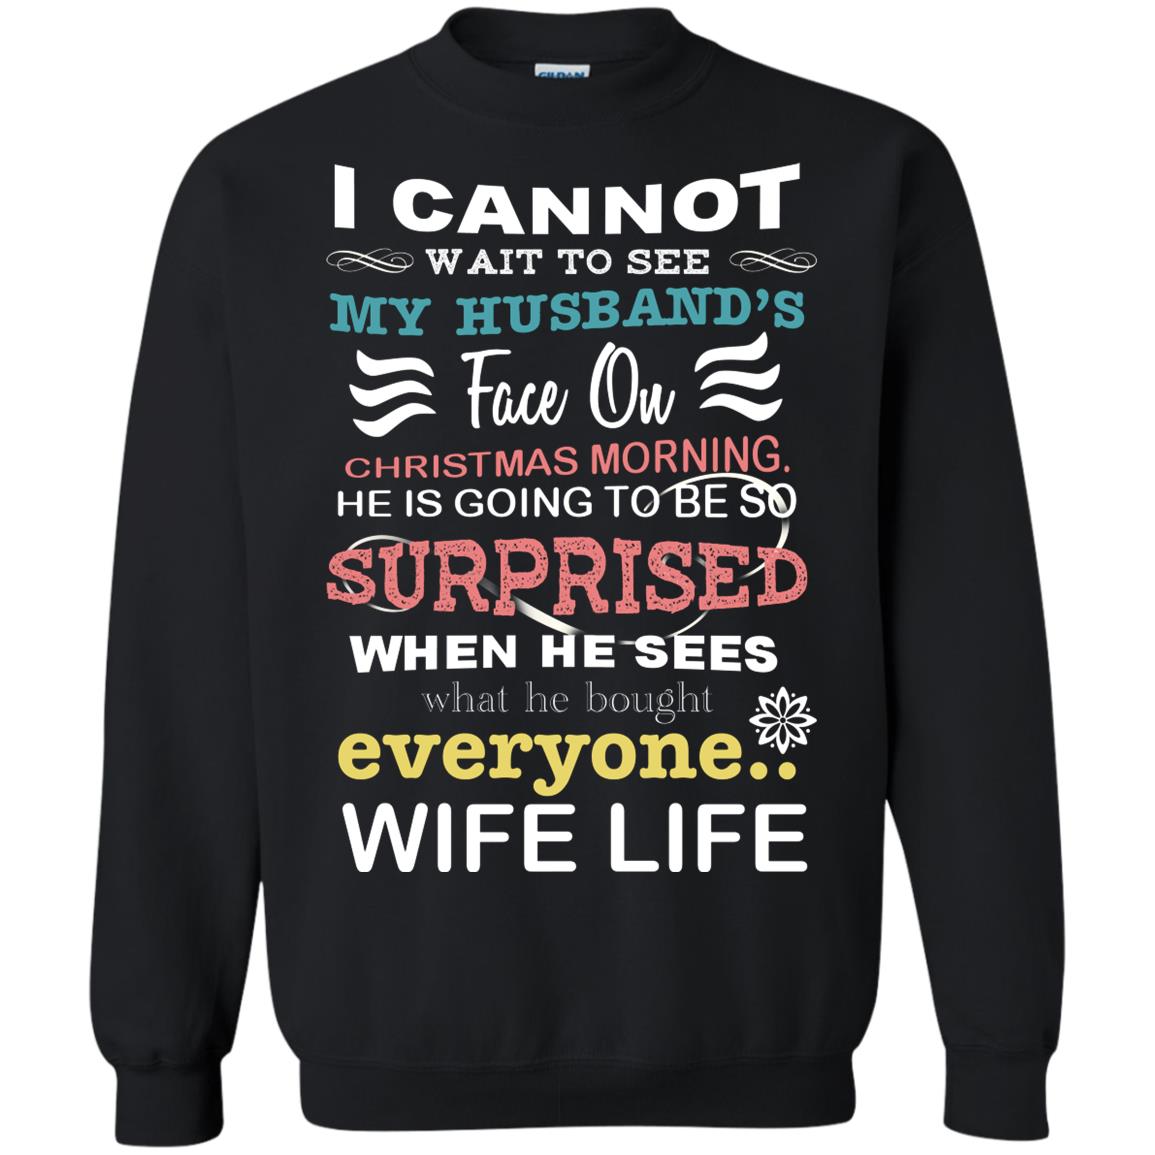 I Cannot Wait To See My Husband's Face On Christmas Morning He Is Going To Be So Surprised When He Sees What He Bought Everyone Wife LifeG180 Gildan Crewneck Pullover Sweatshirt 8 oz.